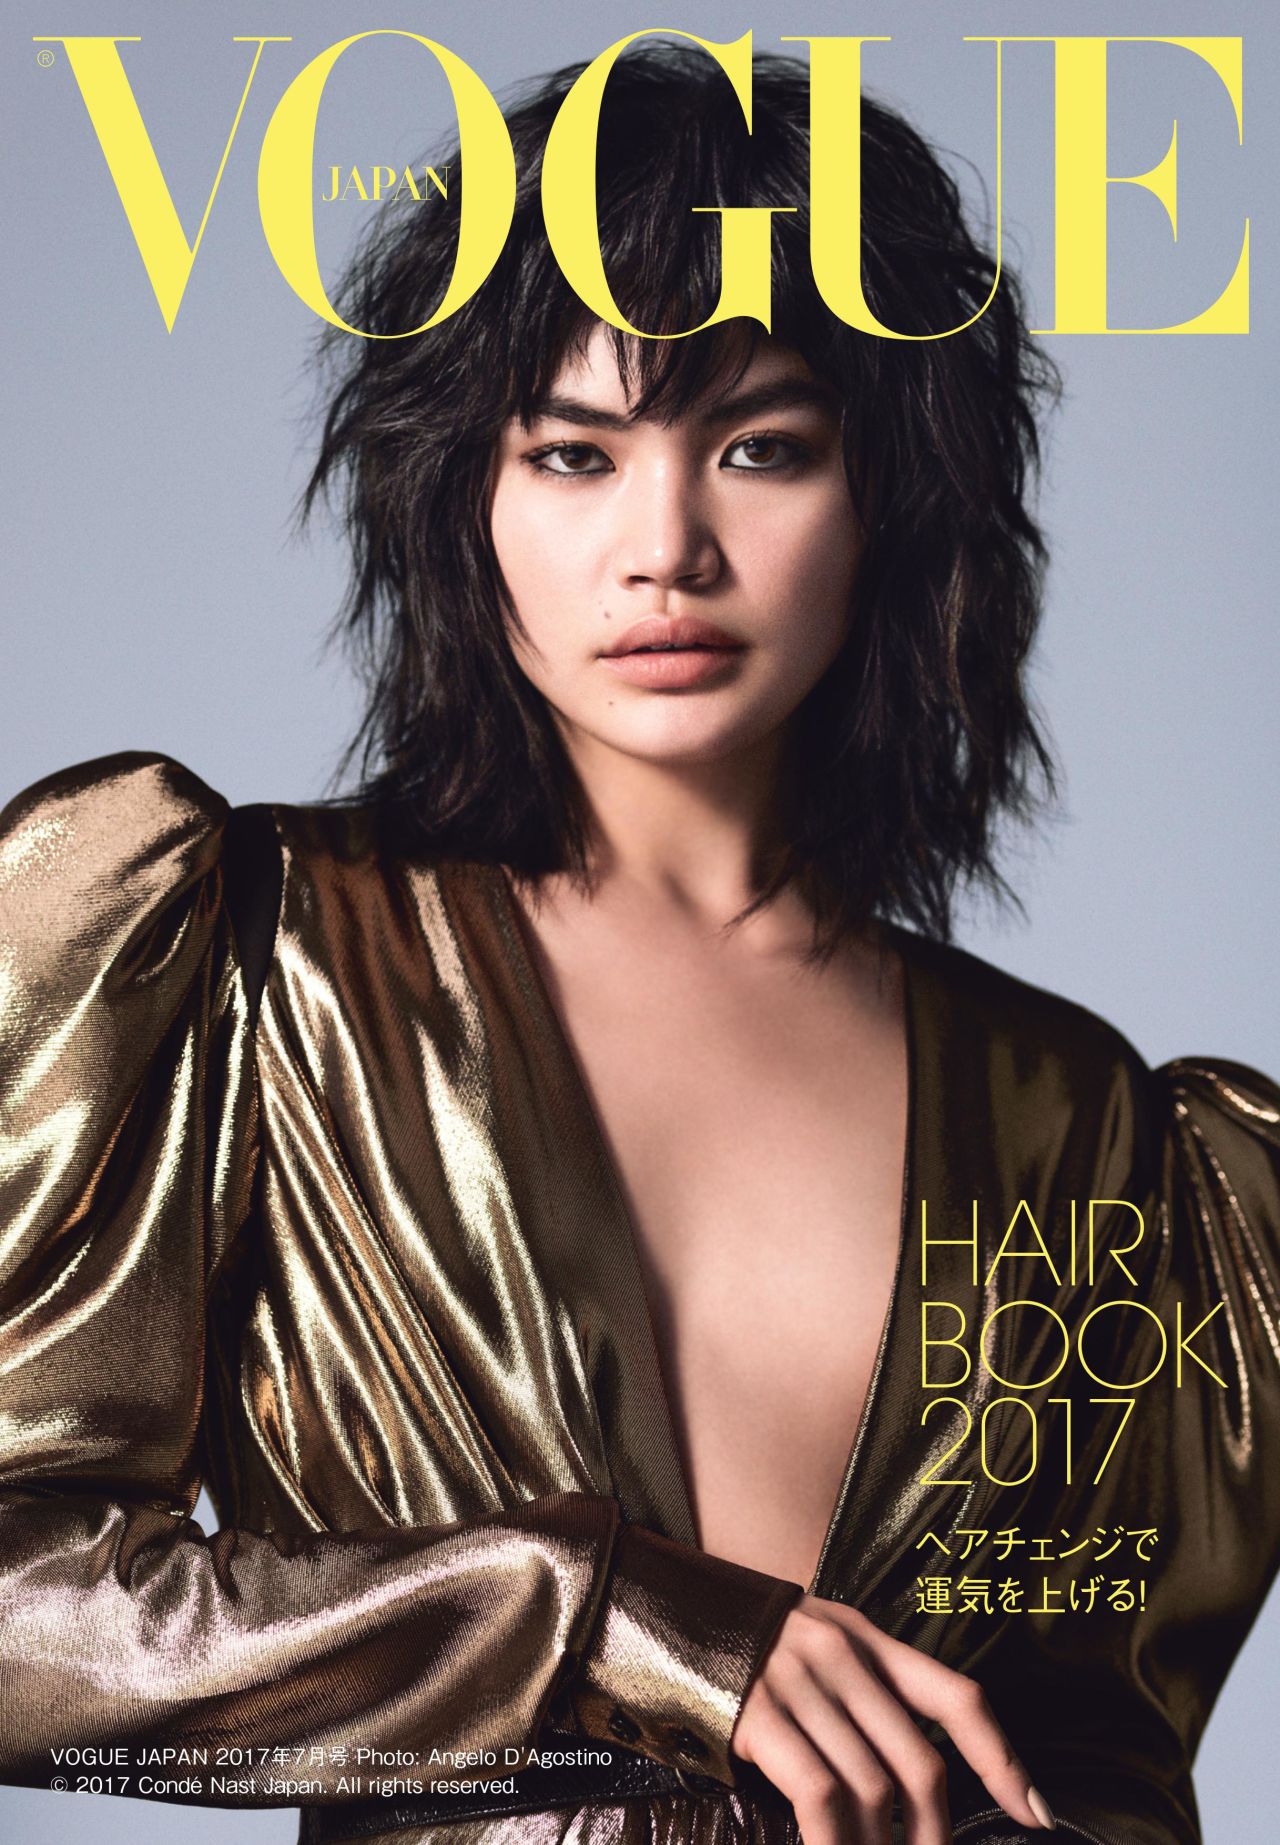 Successful hafu models like Fukushi -- and contemporaries like Kiko Mizuhara and Rola -- have become fashion week regulars, their faces regularly splashed onto international fashion campaigns and magazine covers. Here, Rina poses for Vogue Japan.